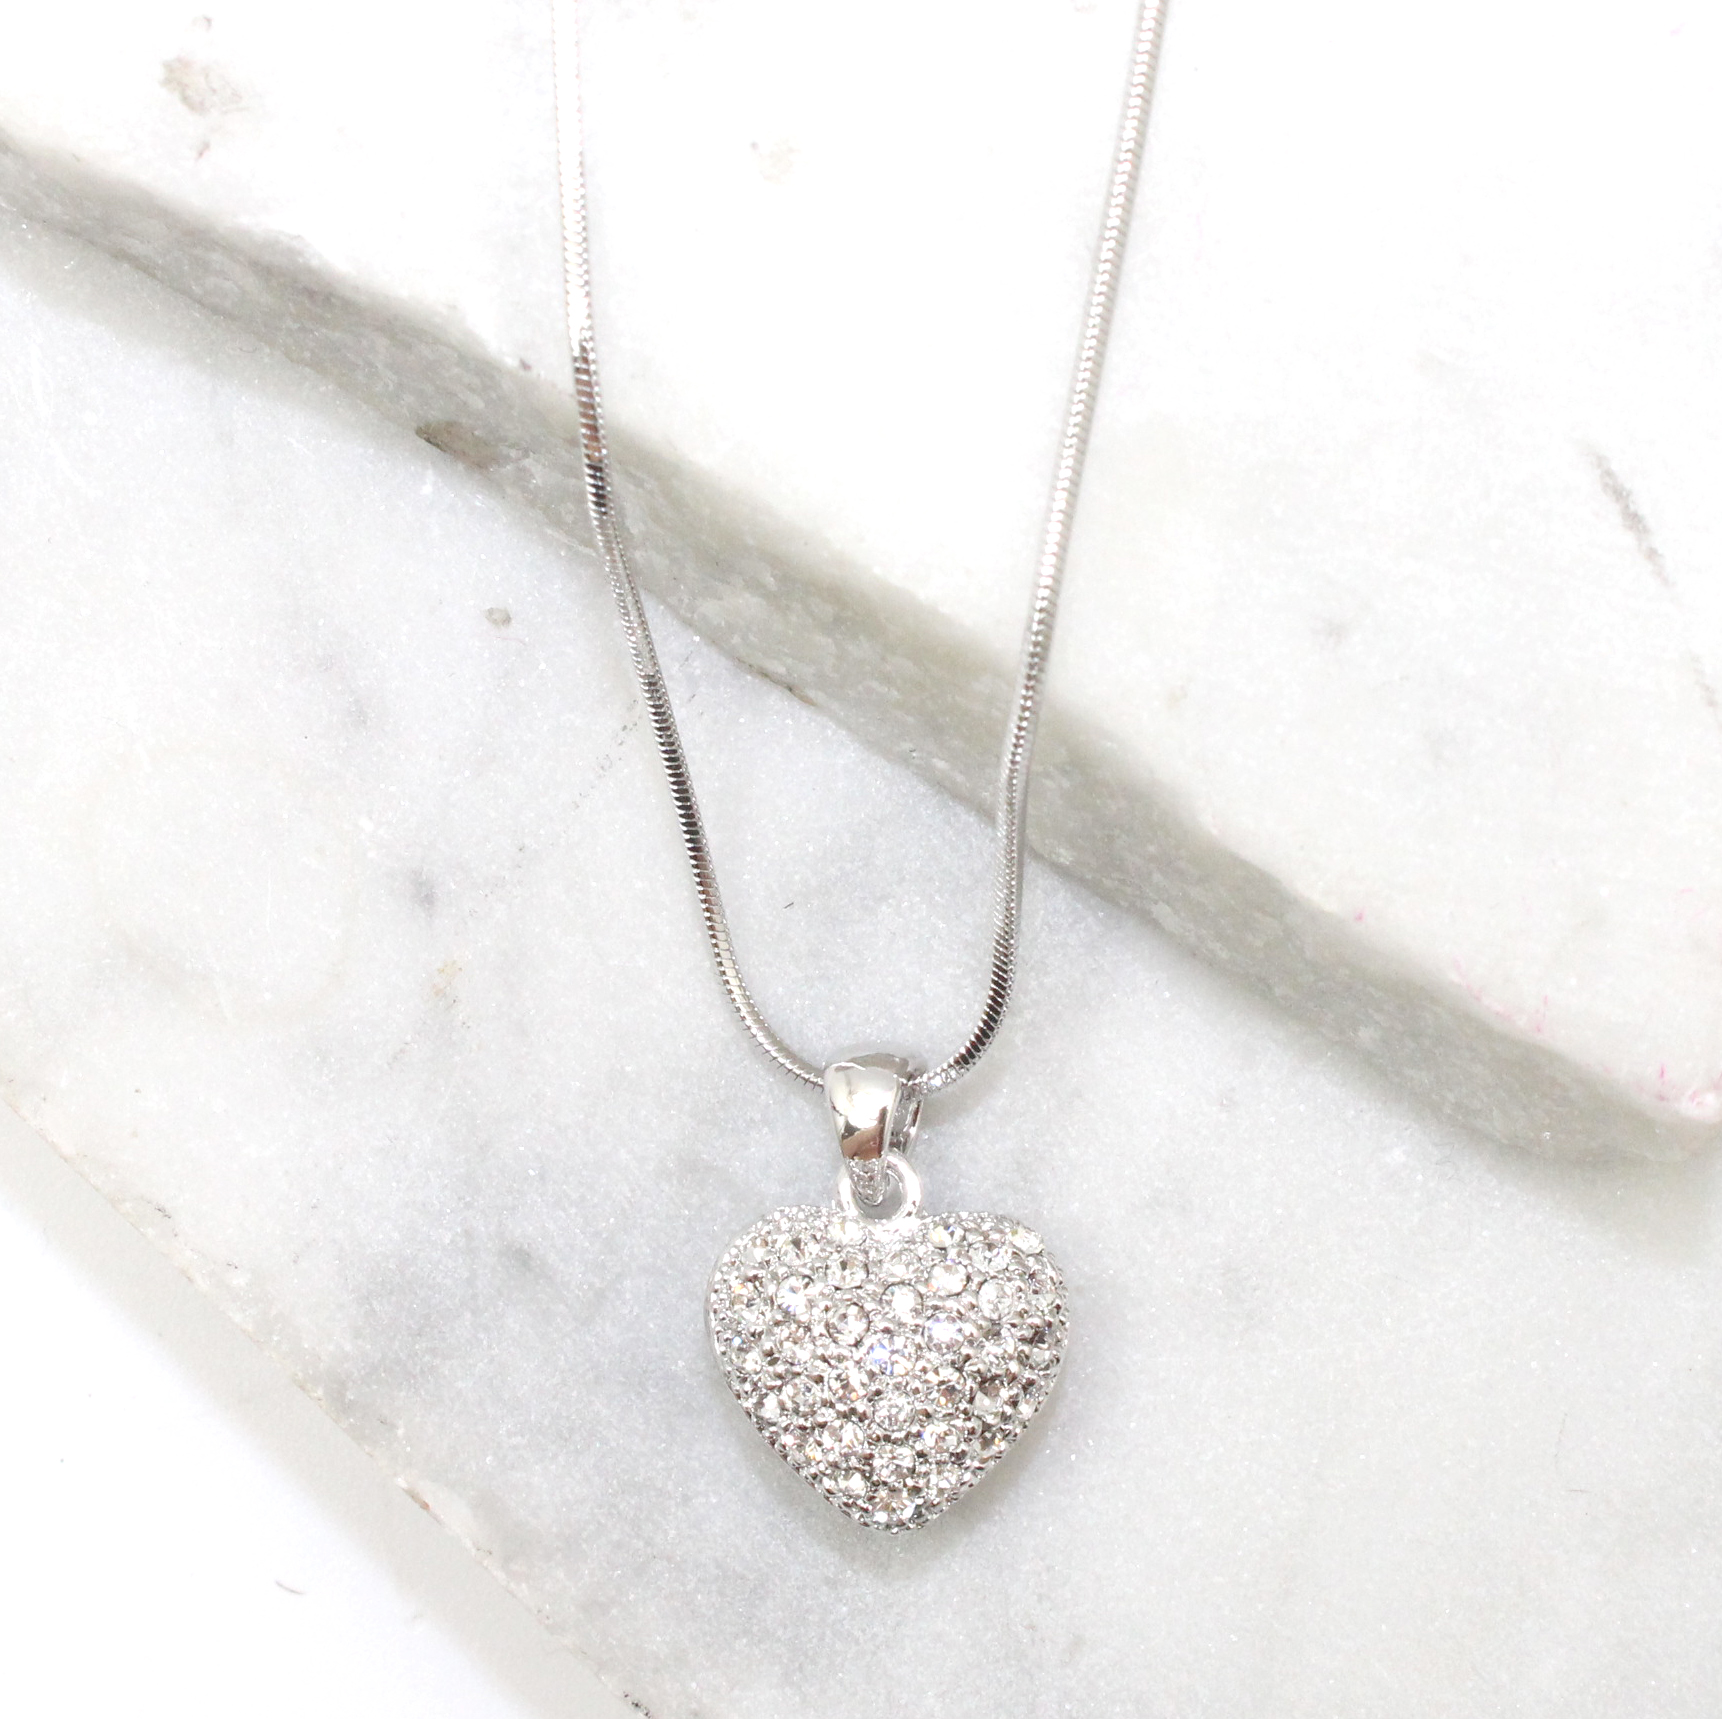 Full of Heart Necklaces